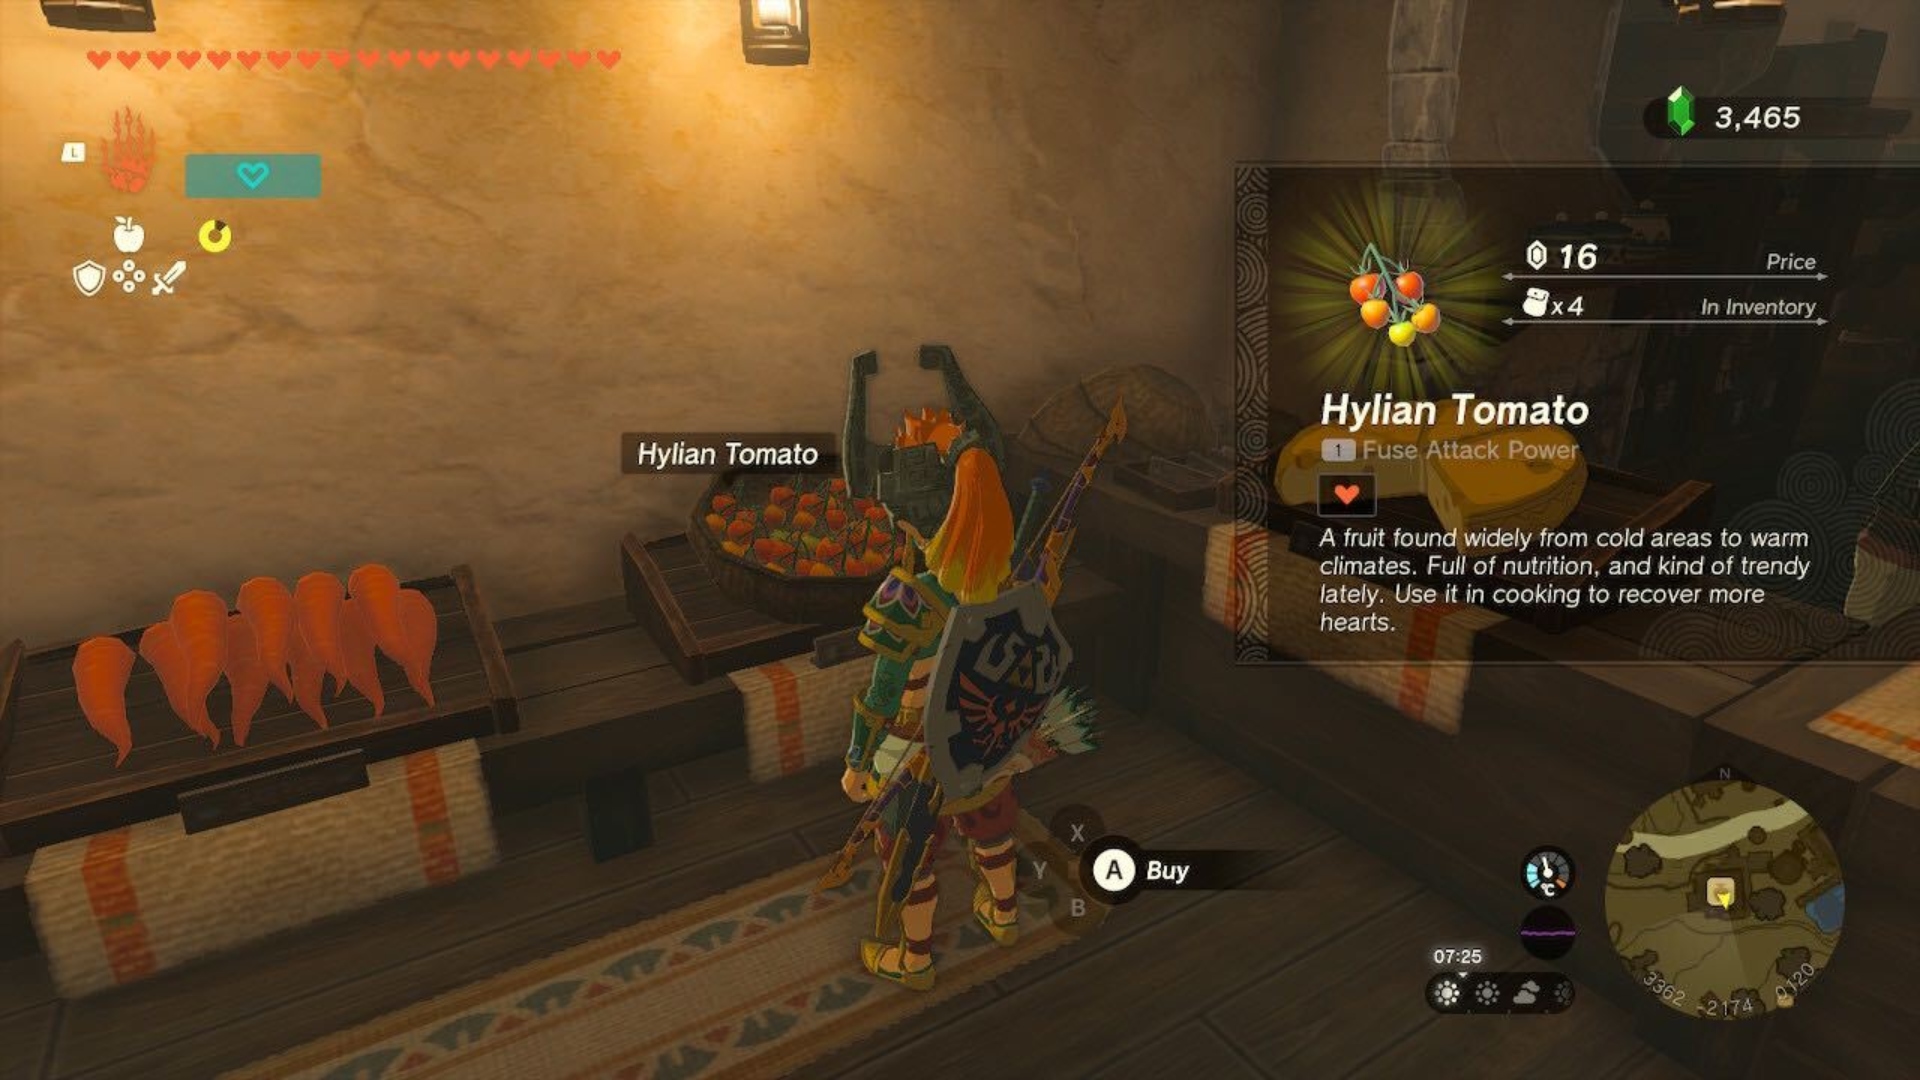 Link buying Hylian Tomatoes in Tears of the Kingdom.